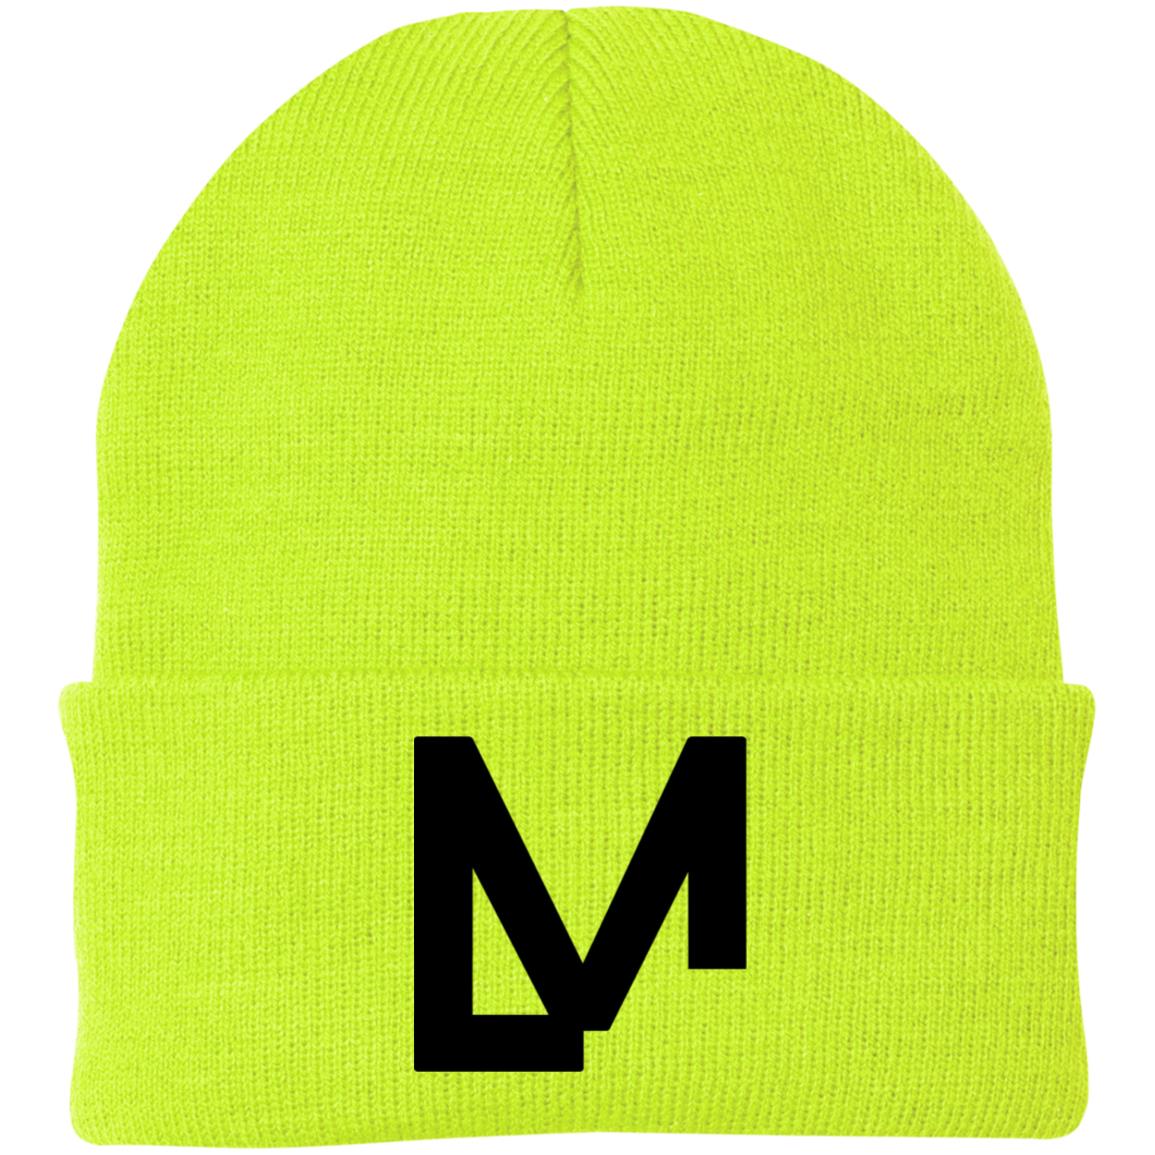 LM Embroidered Knit Cap